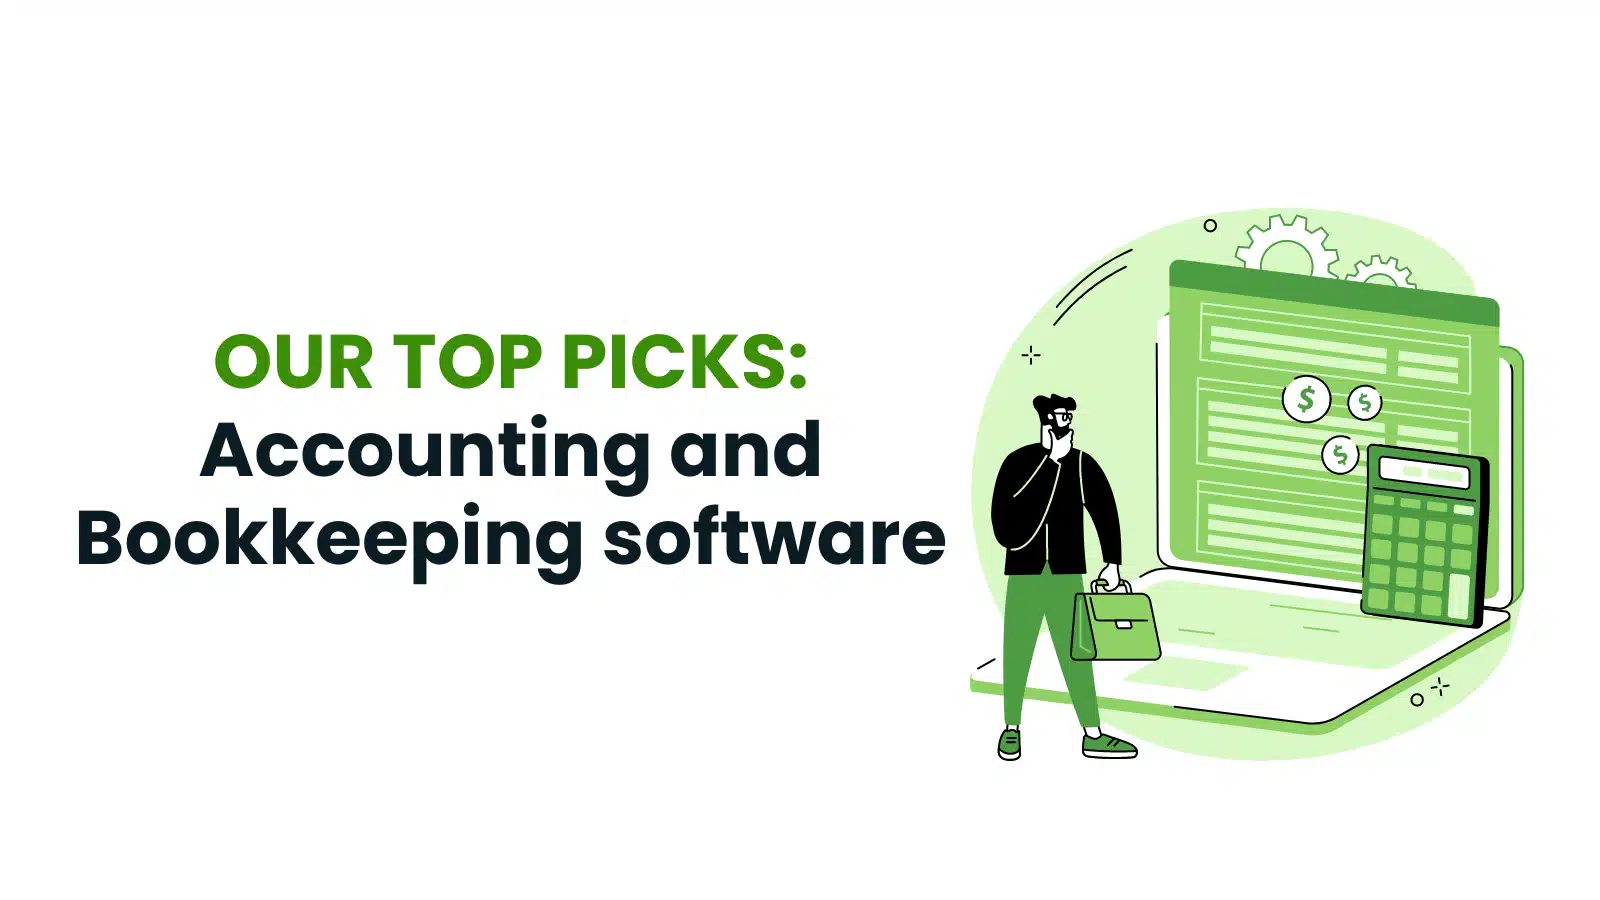 Top picks of accounting and bookkeeping software